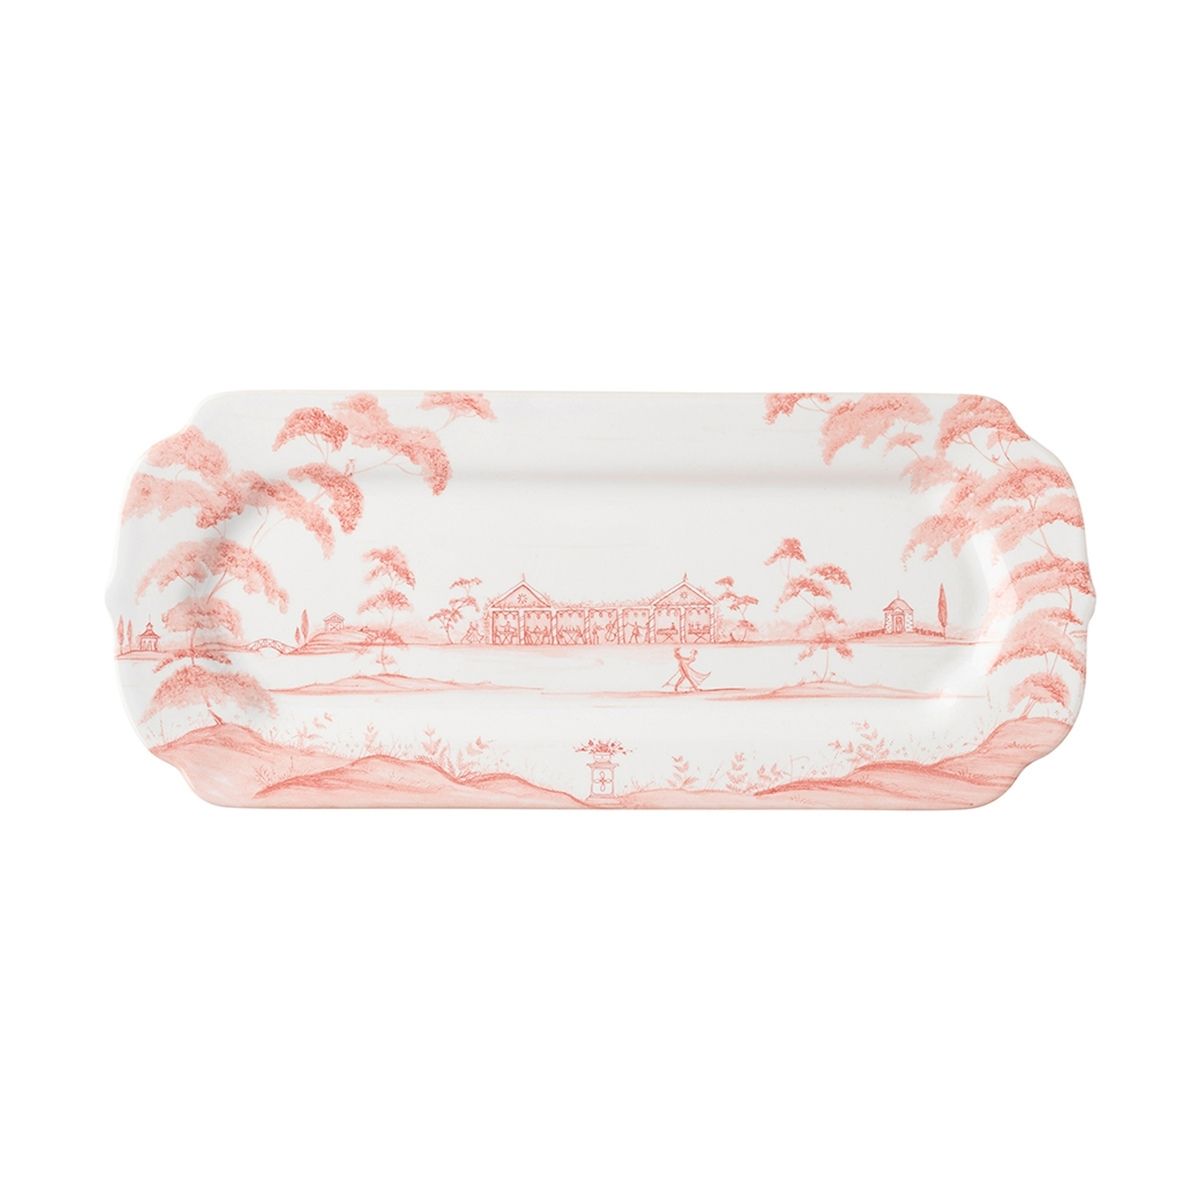 Country Estate Petal Pink House Tray